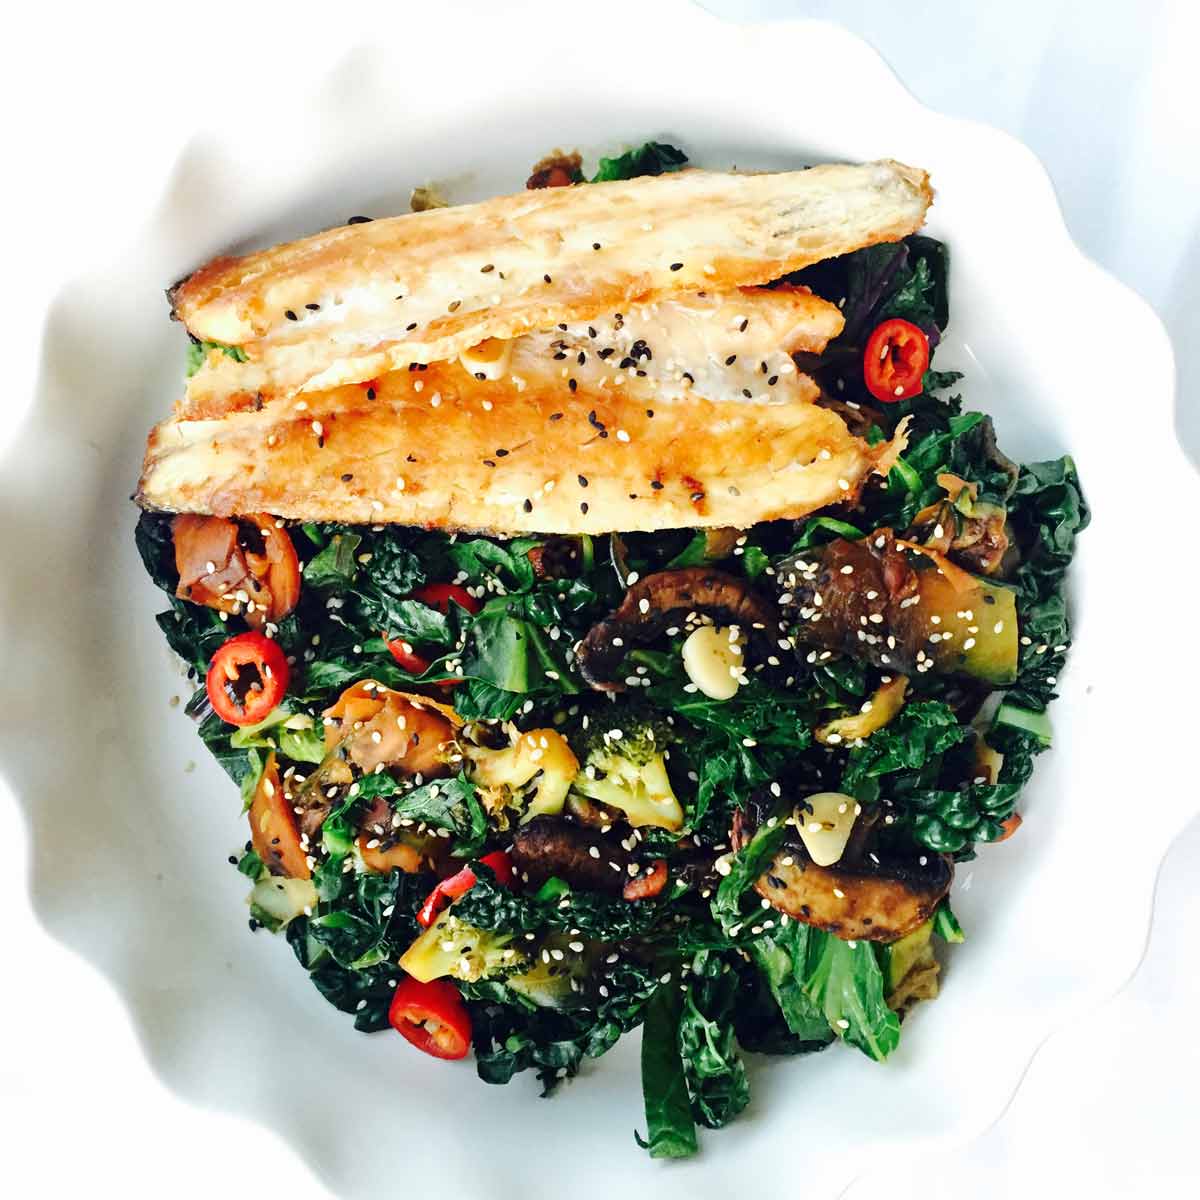 This Cavolo Nero and kale sea bass stir fry is a nutritious and healthy fish recipe you can prepare in a timely fashion.